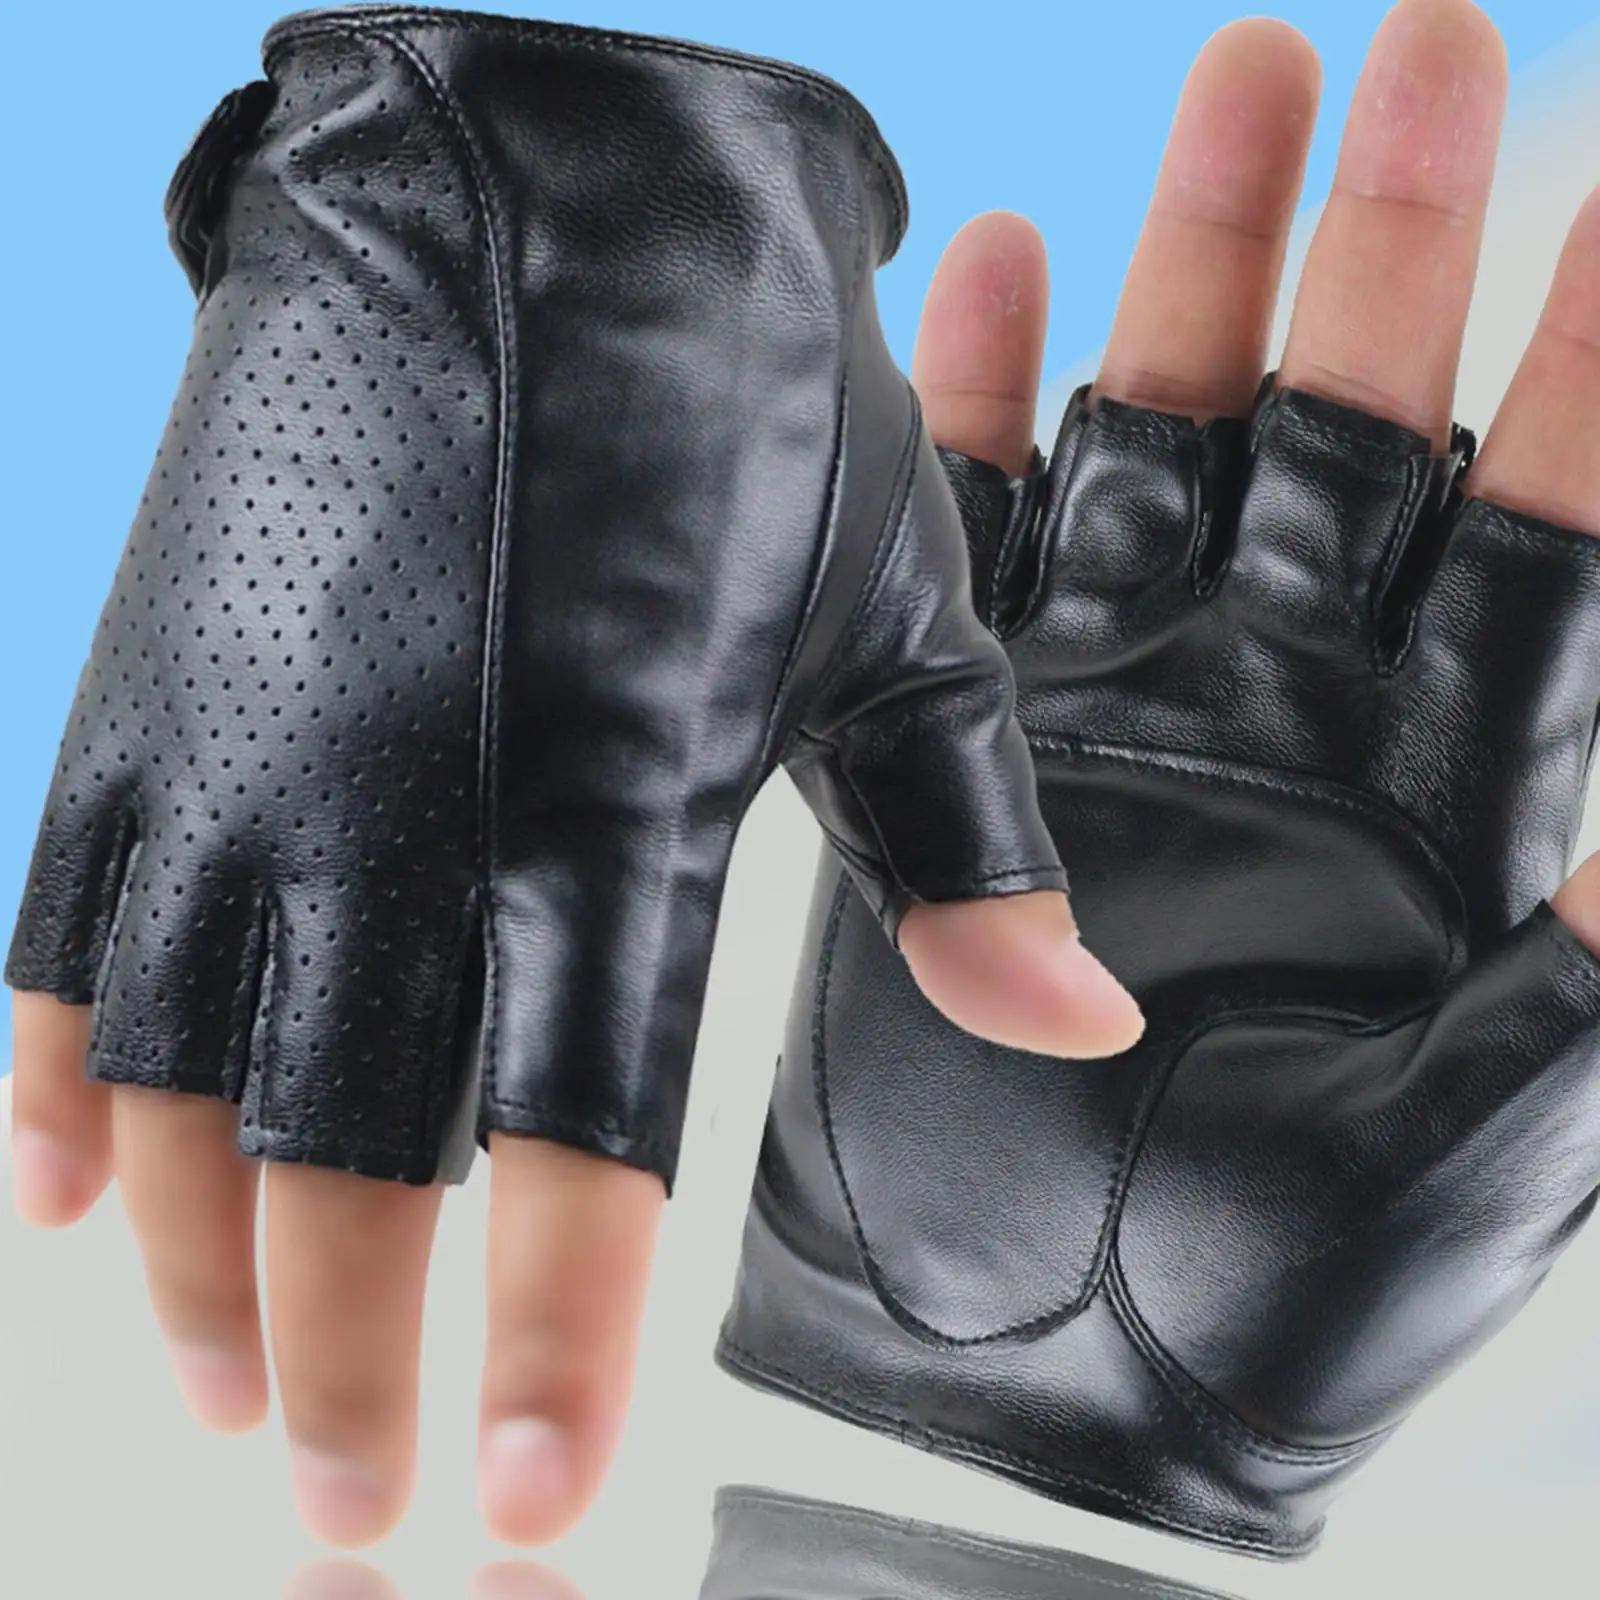 Shockproof Half Finger Gloves Protection Breathable Wear Resistant PU Leather Gloves for Men Outdoor Climbing Motorbike Driving